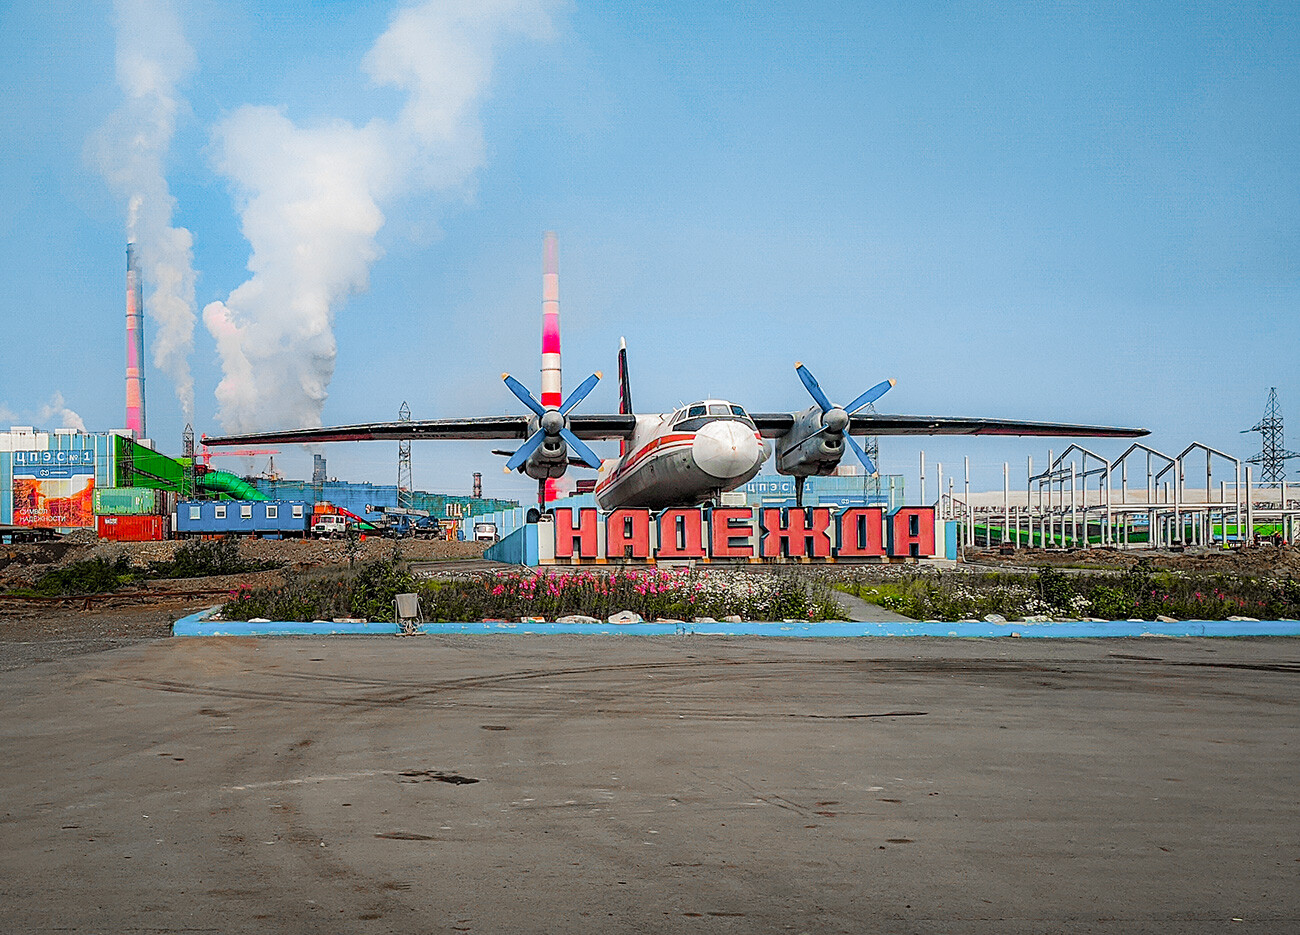 An-26 at the Nadezhdinsky plant. This was the site of the first Norilsk airport in 1950-1965.